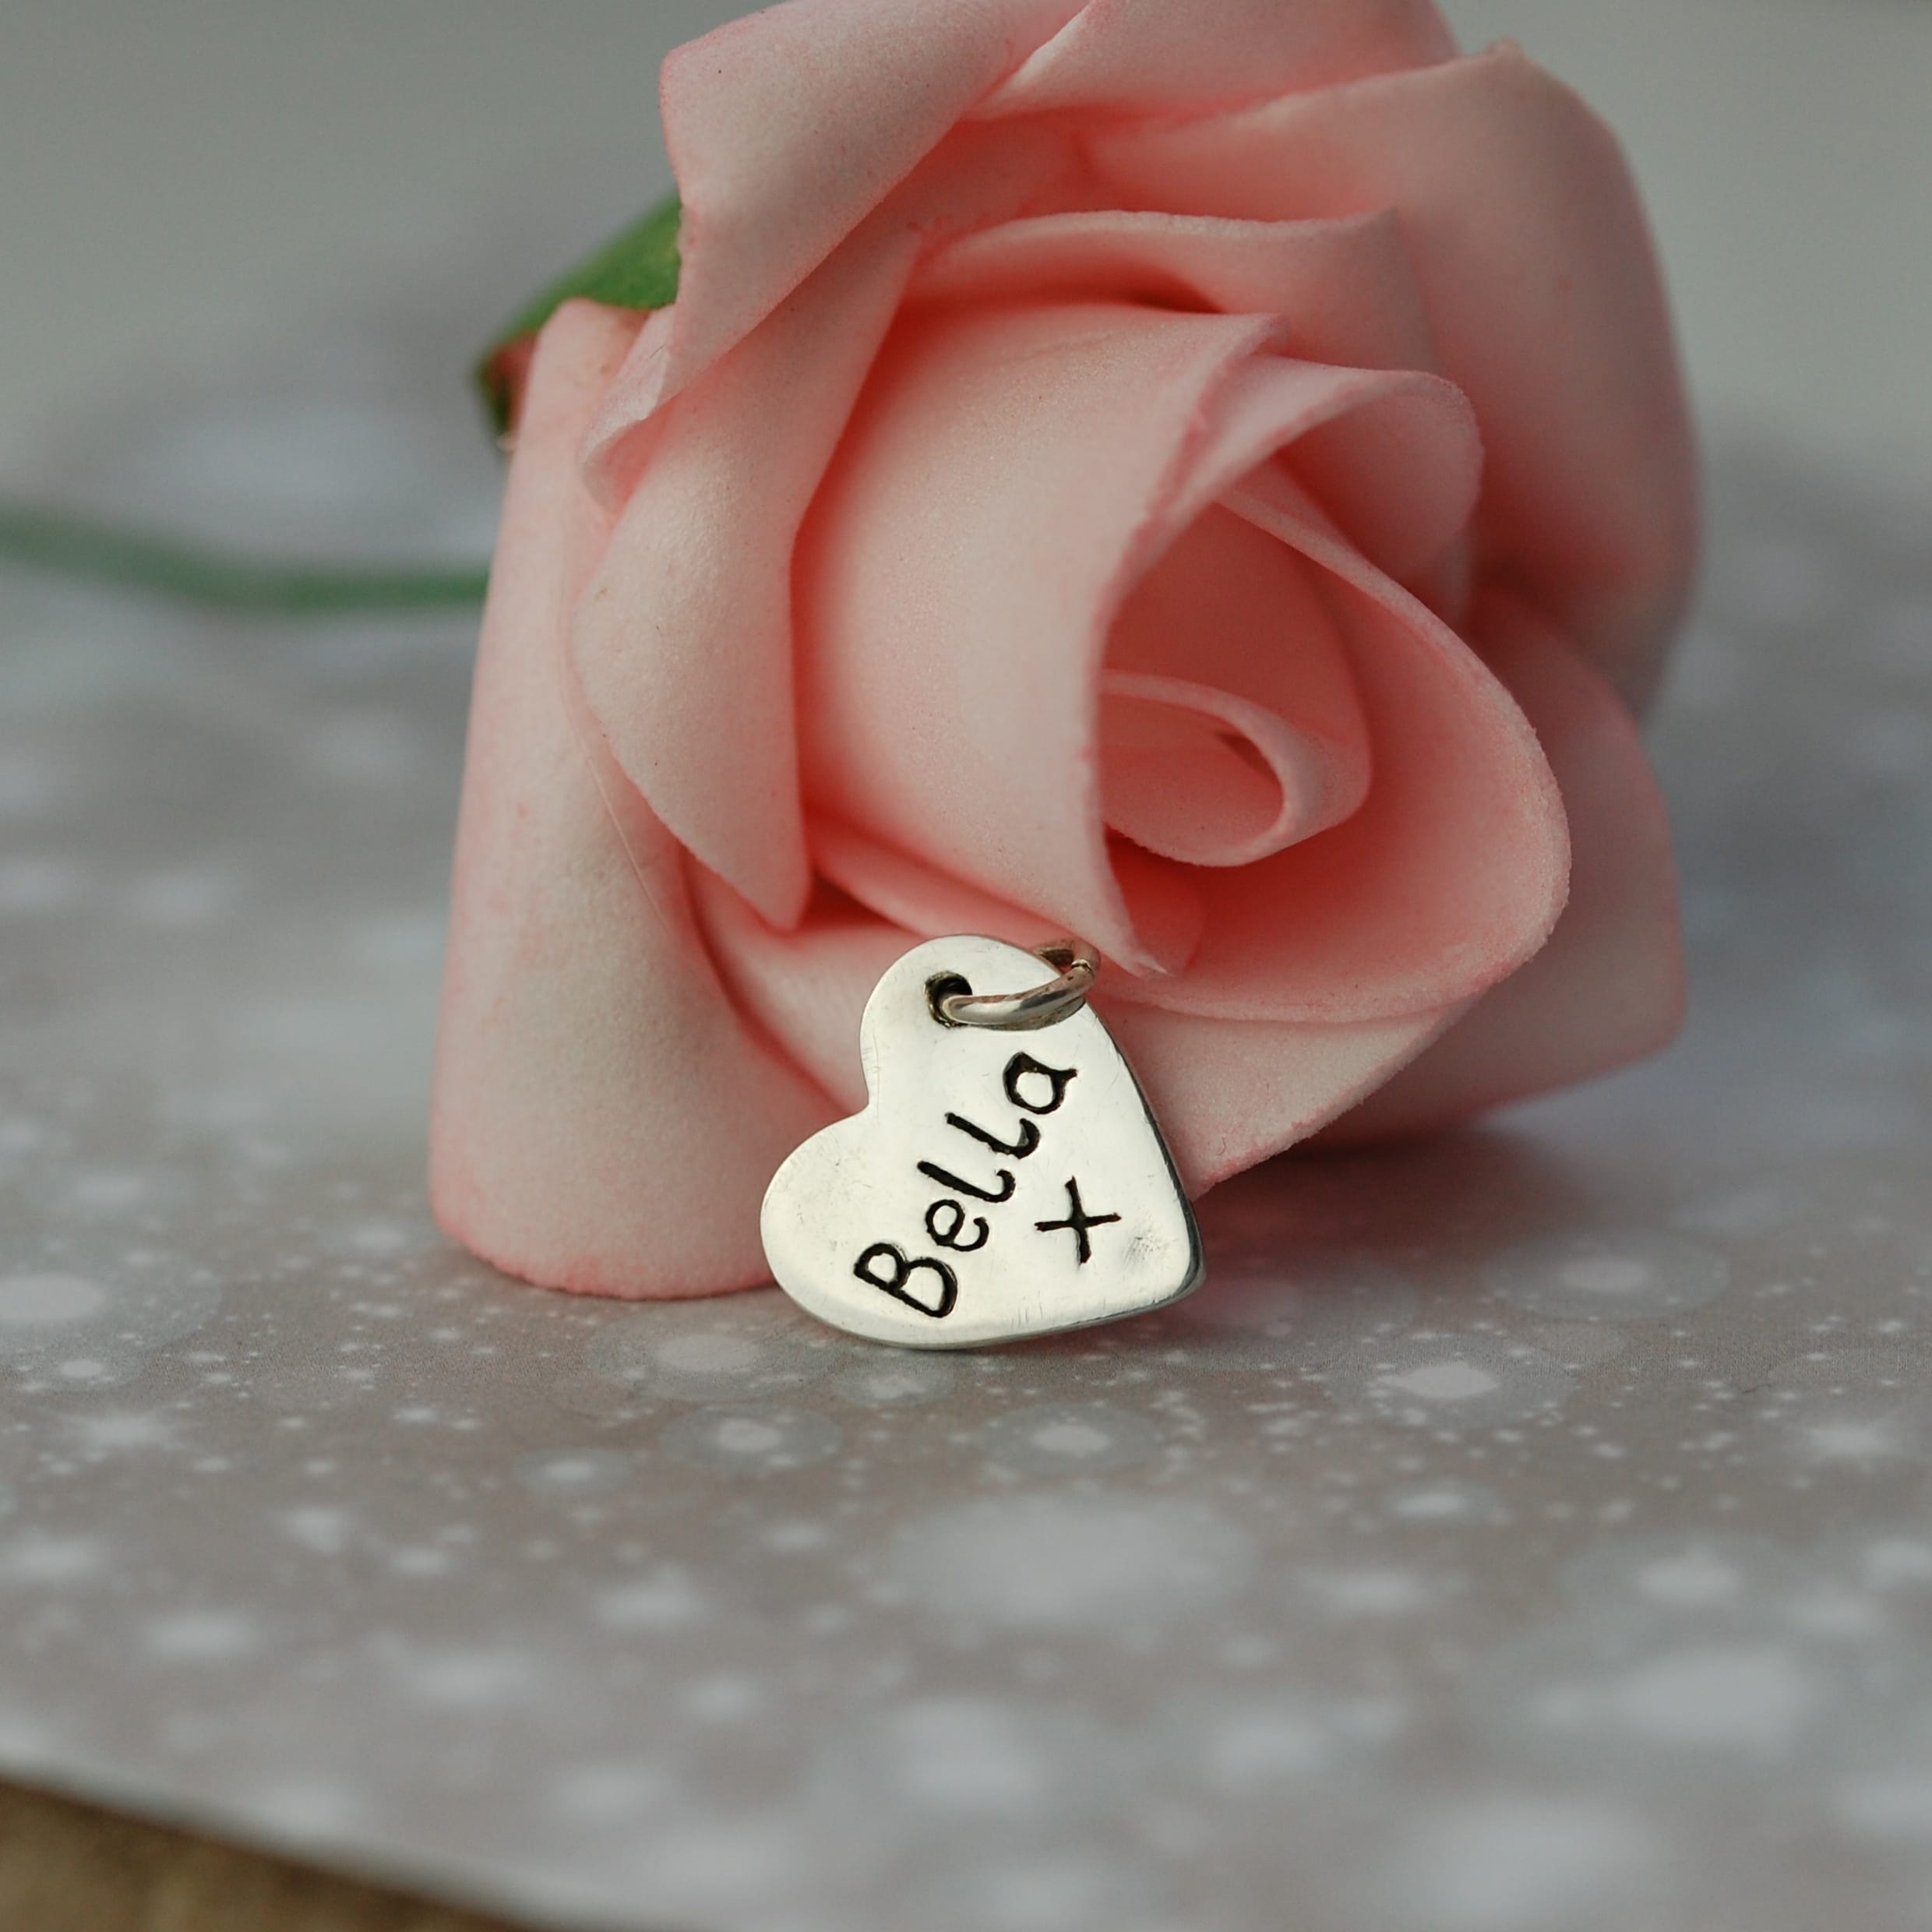 Inscription on the back of small paw print charm